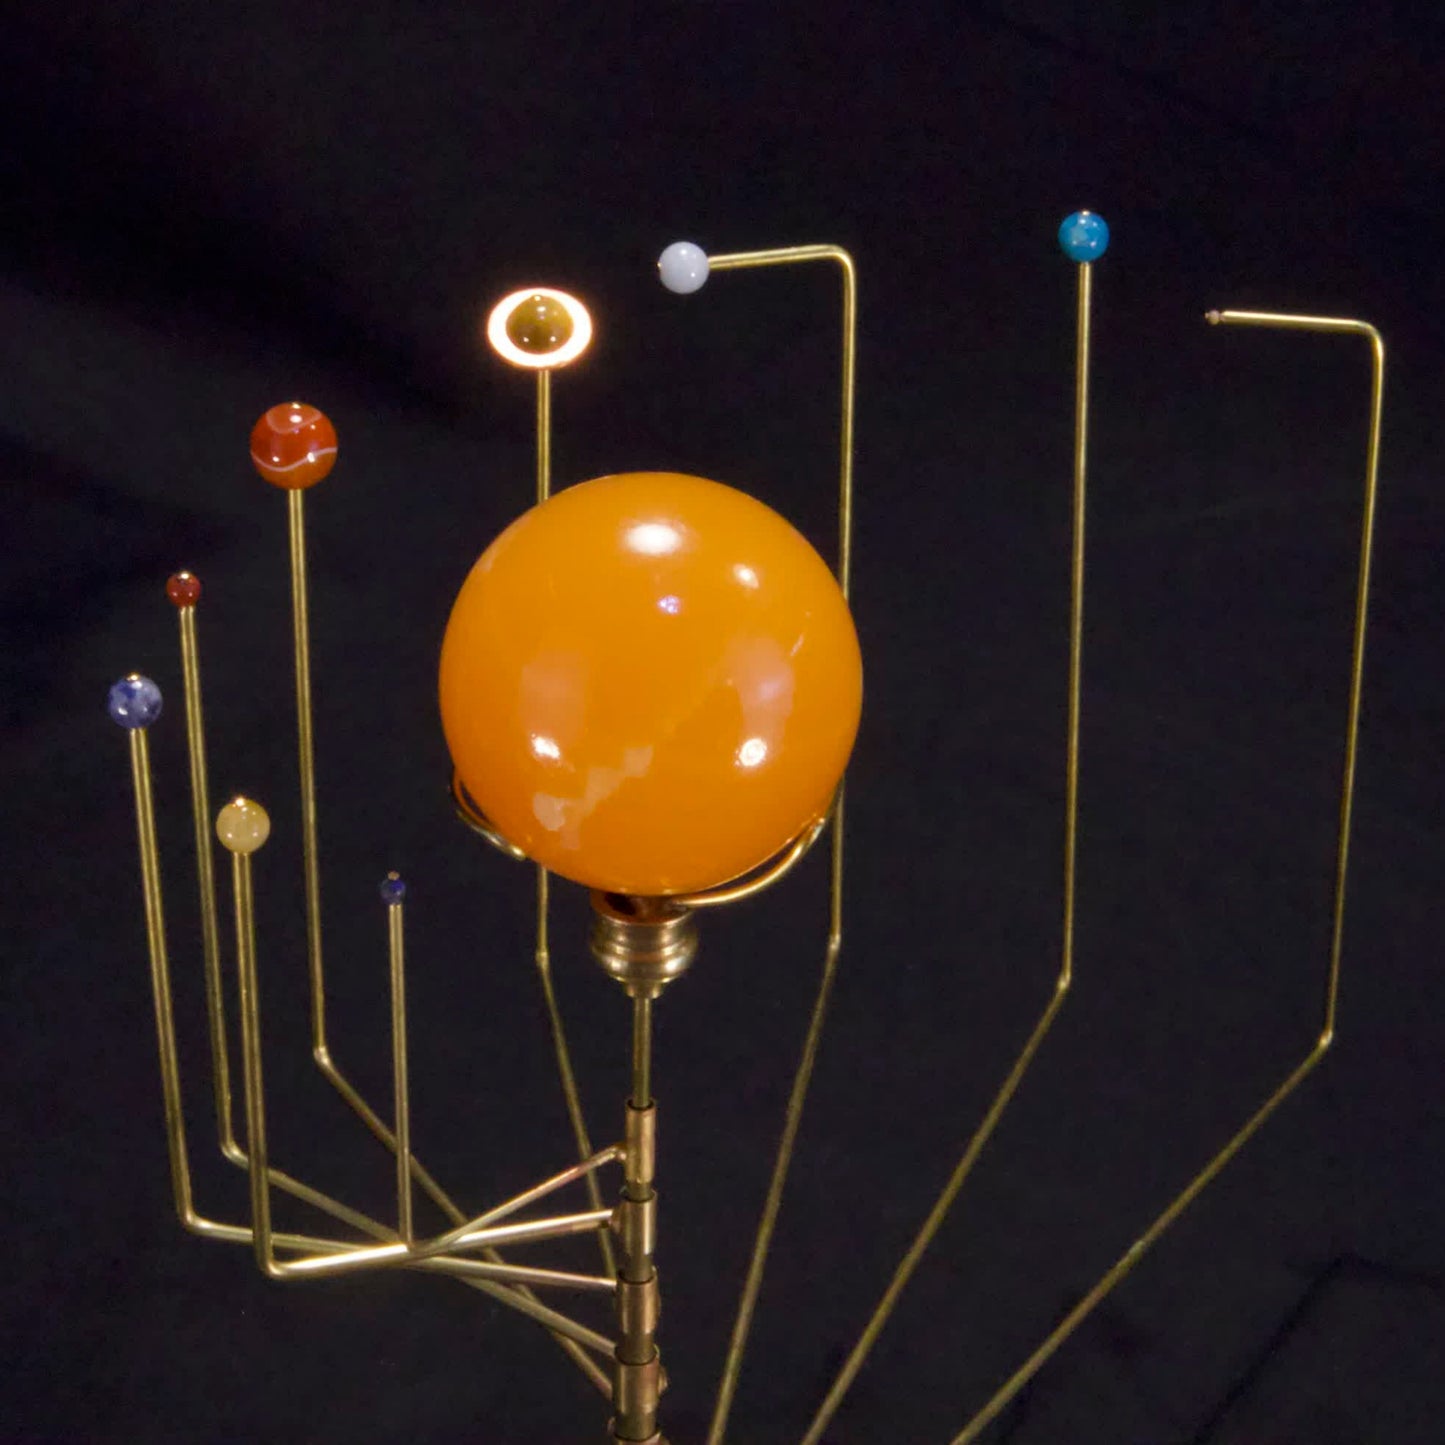 close up of orrery with semi-precious stone planets